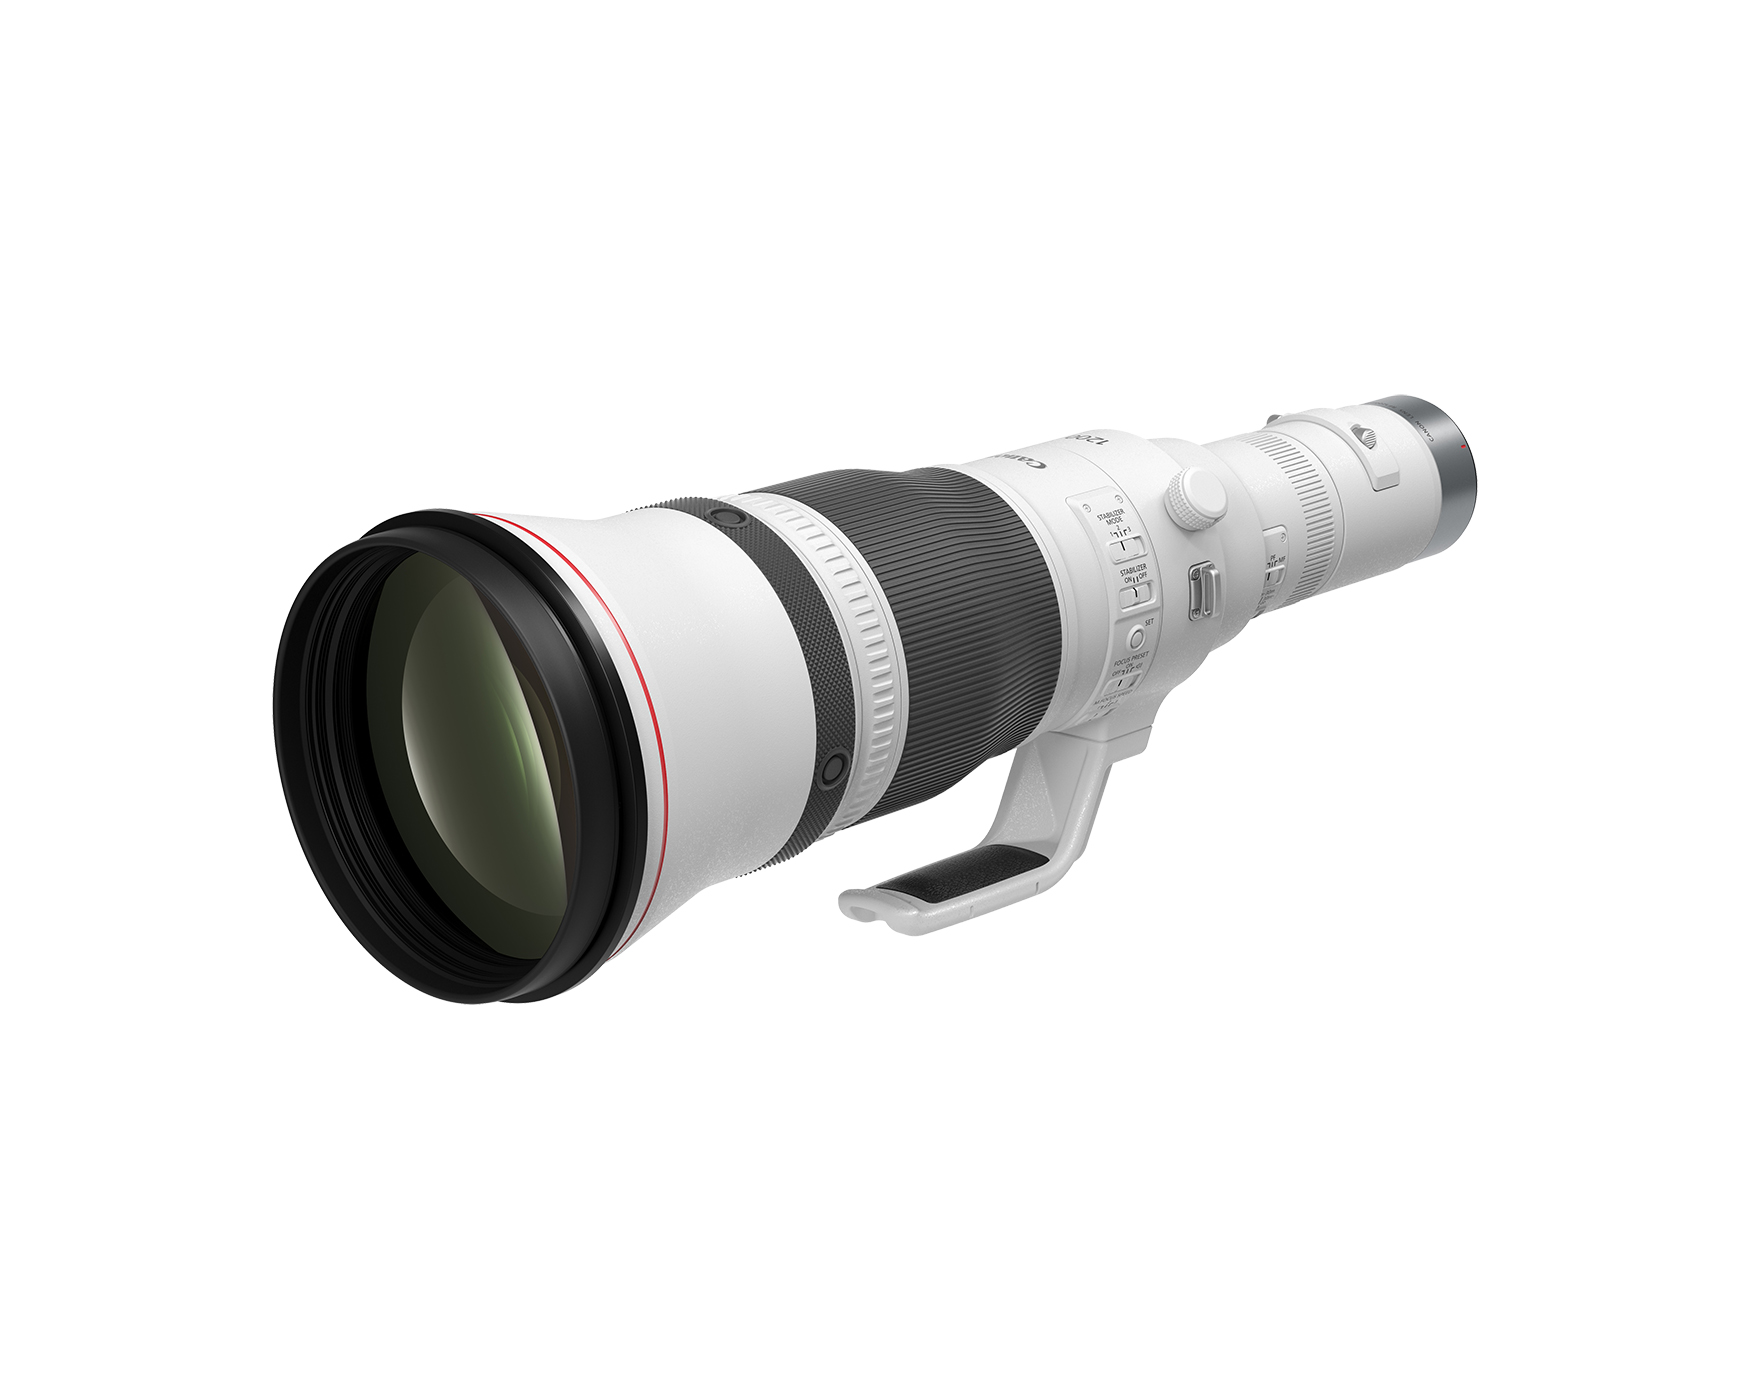 The New Canon Super Telephoto Lenses Are Truly Super Exciting!